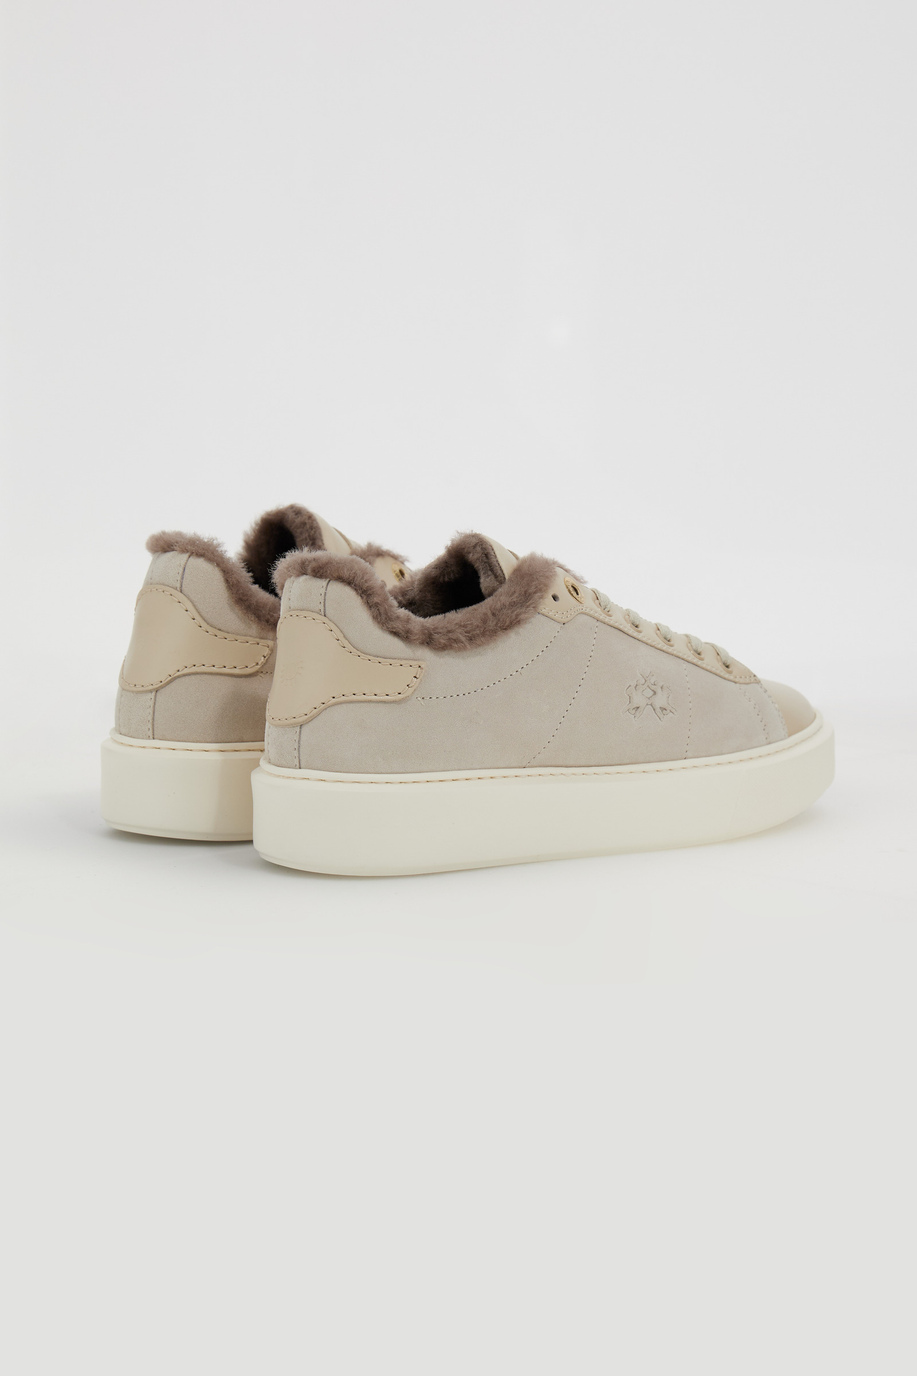 Women's trainers with inner lining - Woman shoes | La Martina - Official Online Shop